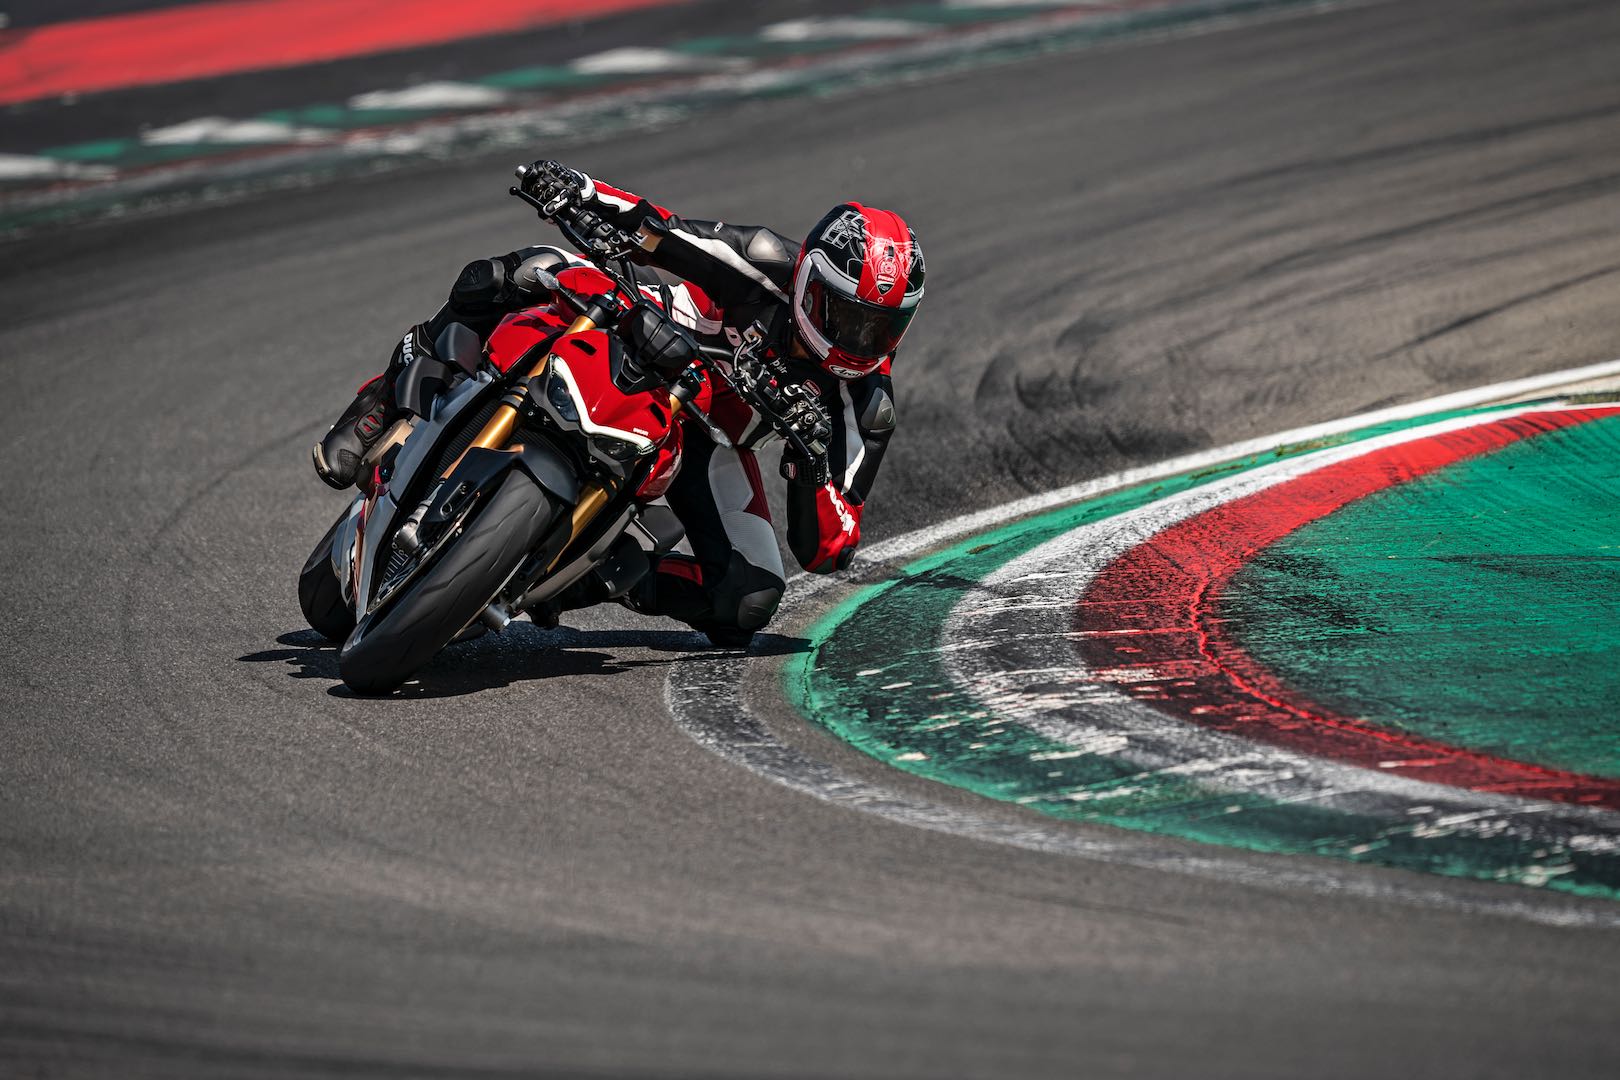 Ducati Streetfighter V4 & V4S First Look: 15 Fast Facts (Video)